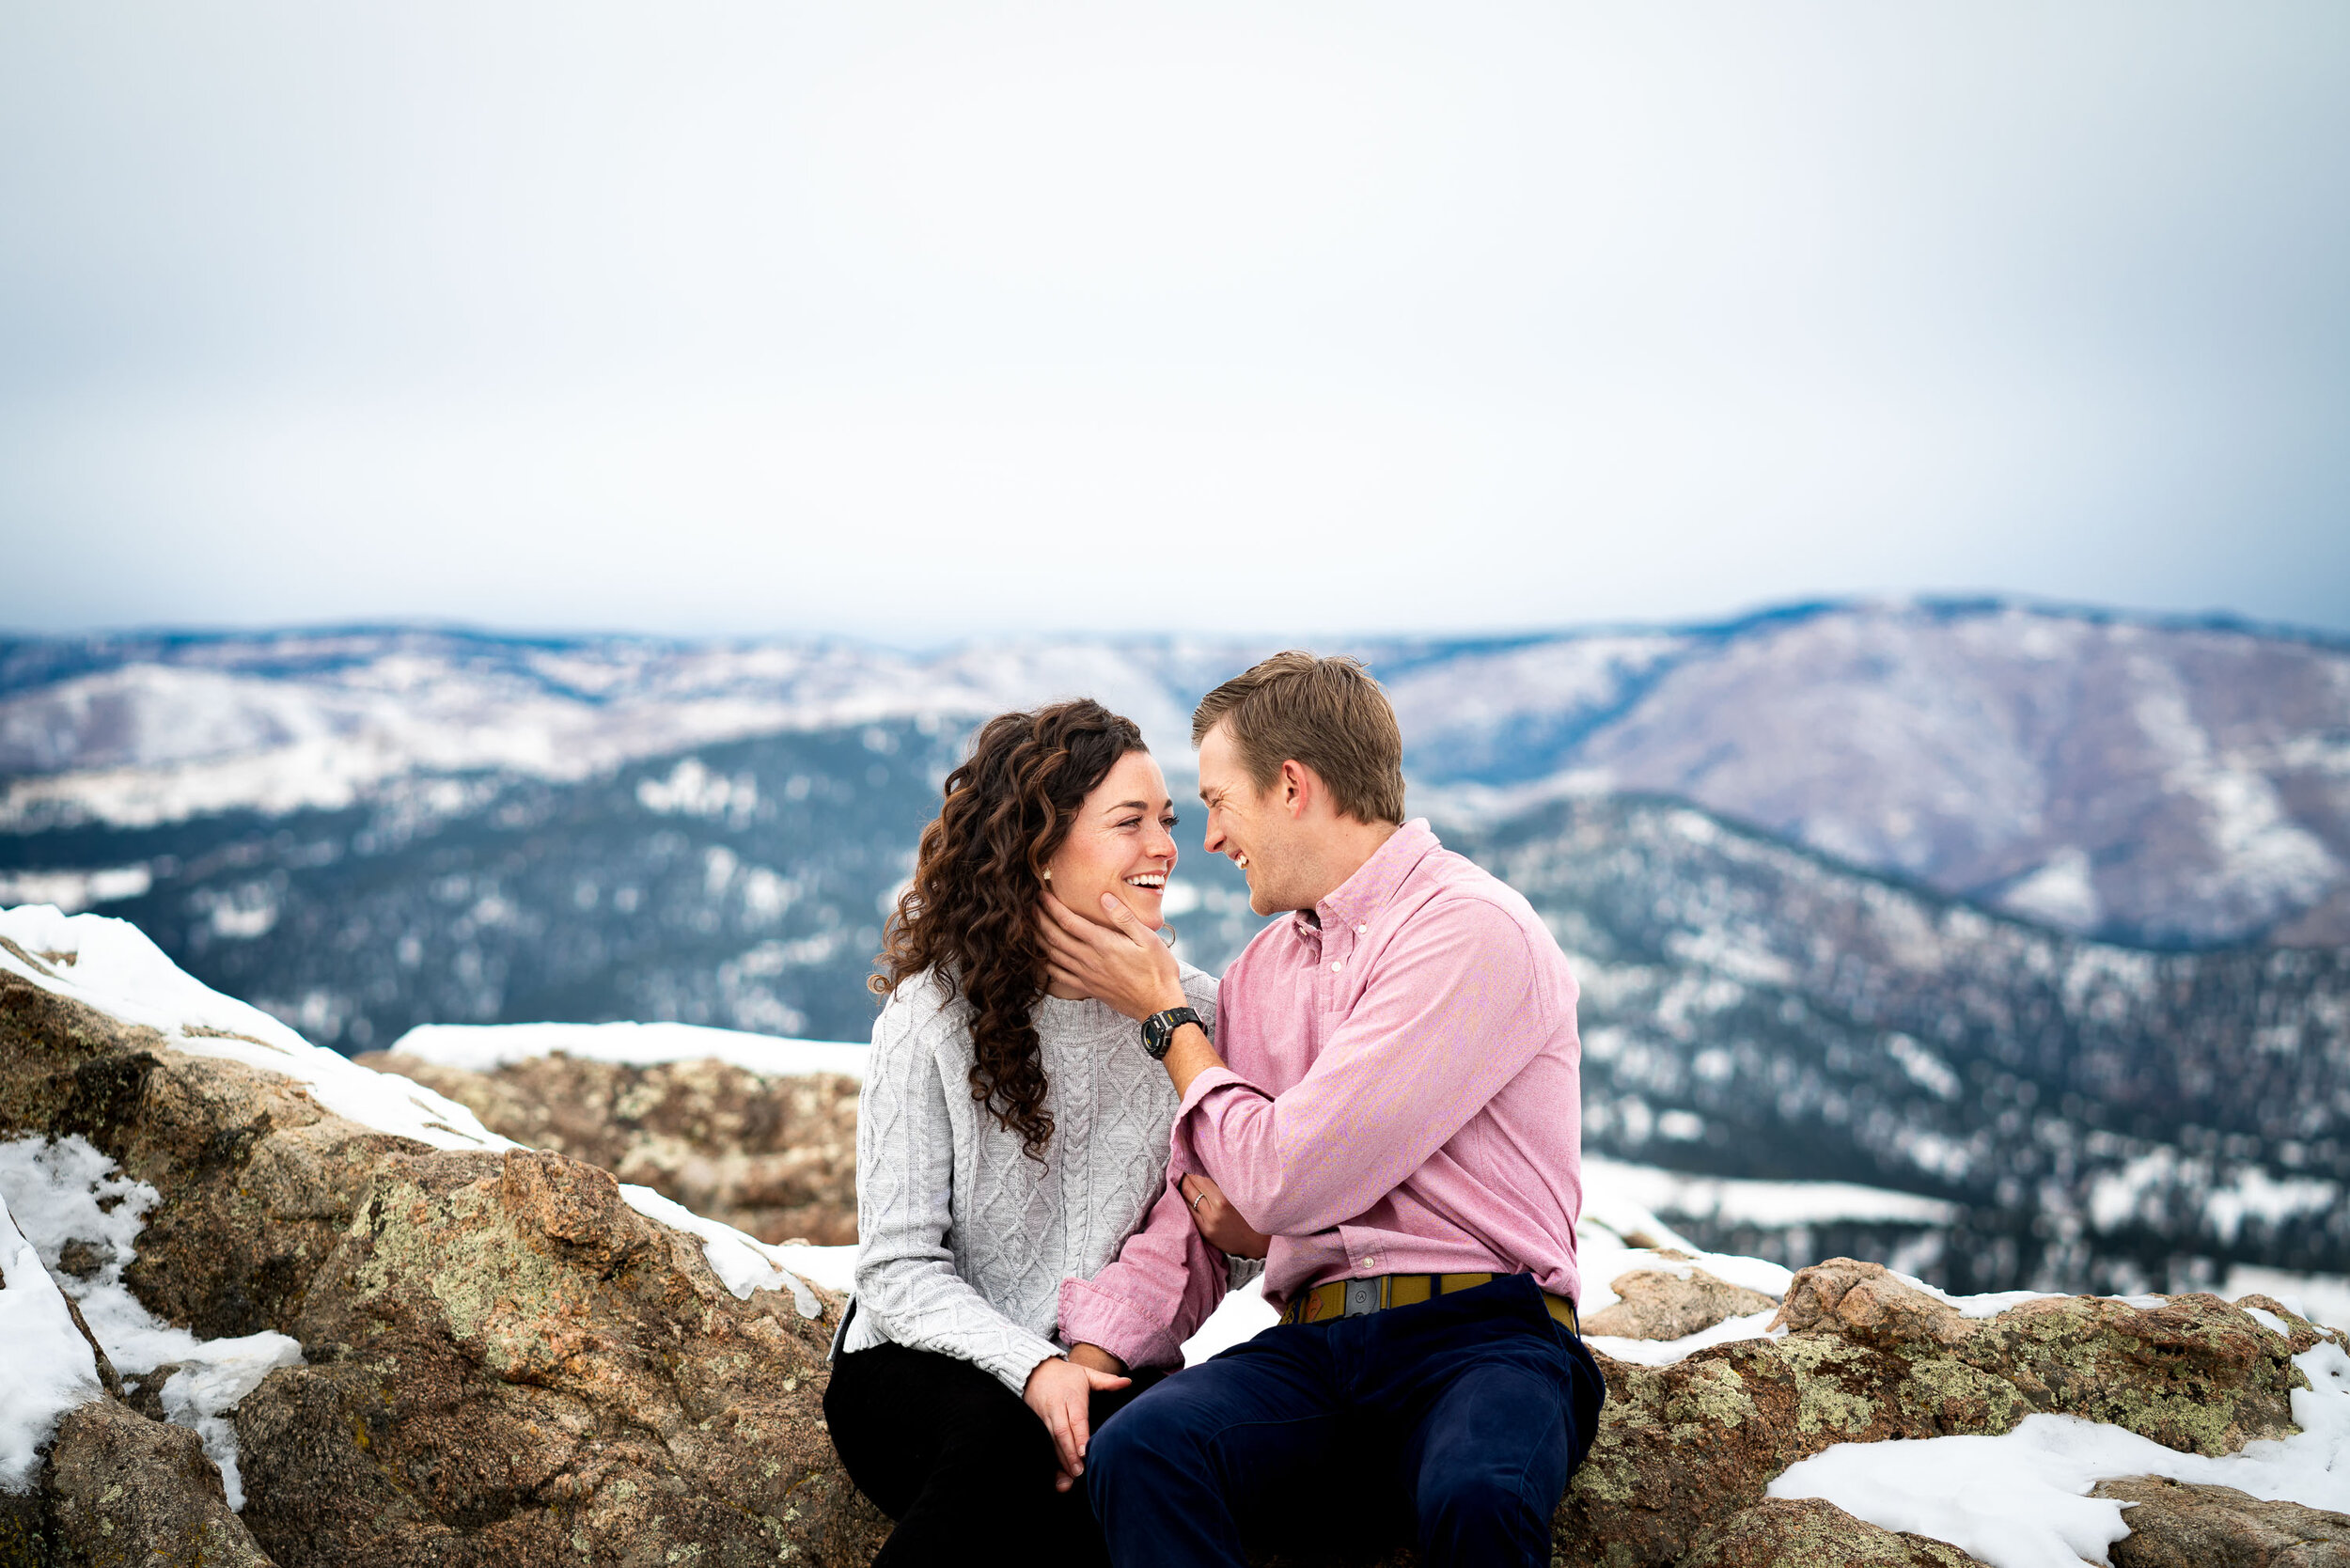 Engaged couple poses for portraits on a rocky ledge overlooking the snow-capped Rocky Mountains in the distance, Engagement Session, Engagement Photos, Engagement Photos Inspiration, Engagement Photography, Engagement Photographer, Winter Engagement Photos, Mountain Engagement Photos, Lost Gulch Overlook engagement session, Lost Gulch Overlook engagement photos, Lost Gulch Overlook engagement photography, Lost Gulch Overlook engagement photographer, Lost Gulch Overlook  engagement inspiration, Boulder engagement session, Boulder engagement photos, Boulder engagement photography, Boulder engagement photographer, Boulder engagement inspiration, Colorado engagement session, Colorado engagement photos, Colorado engagement photography, Colorado engagement photographer, Colorado engagement inspiration